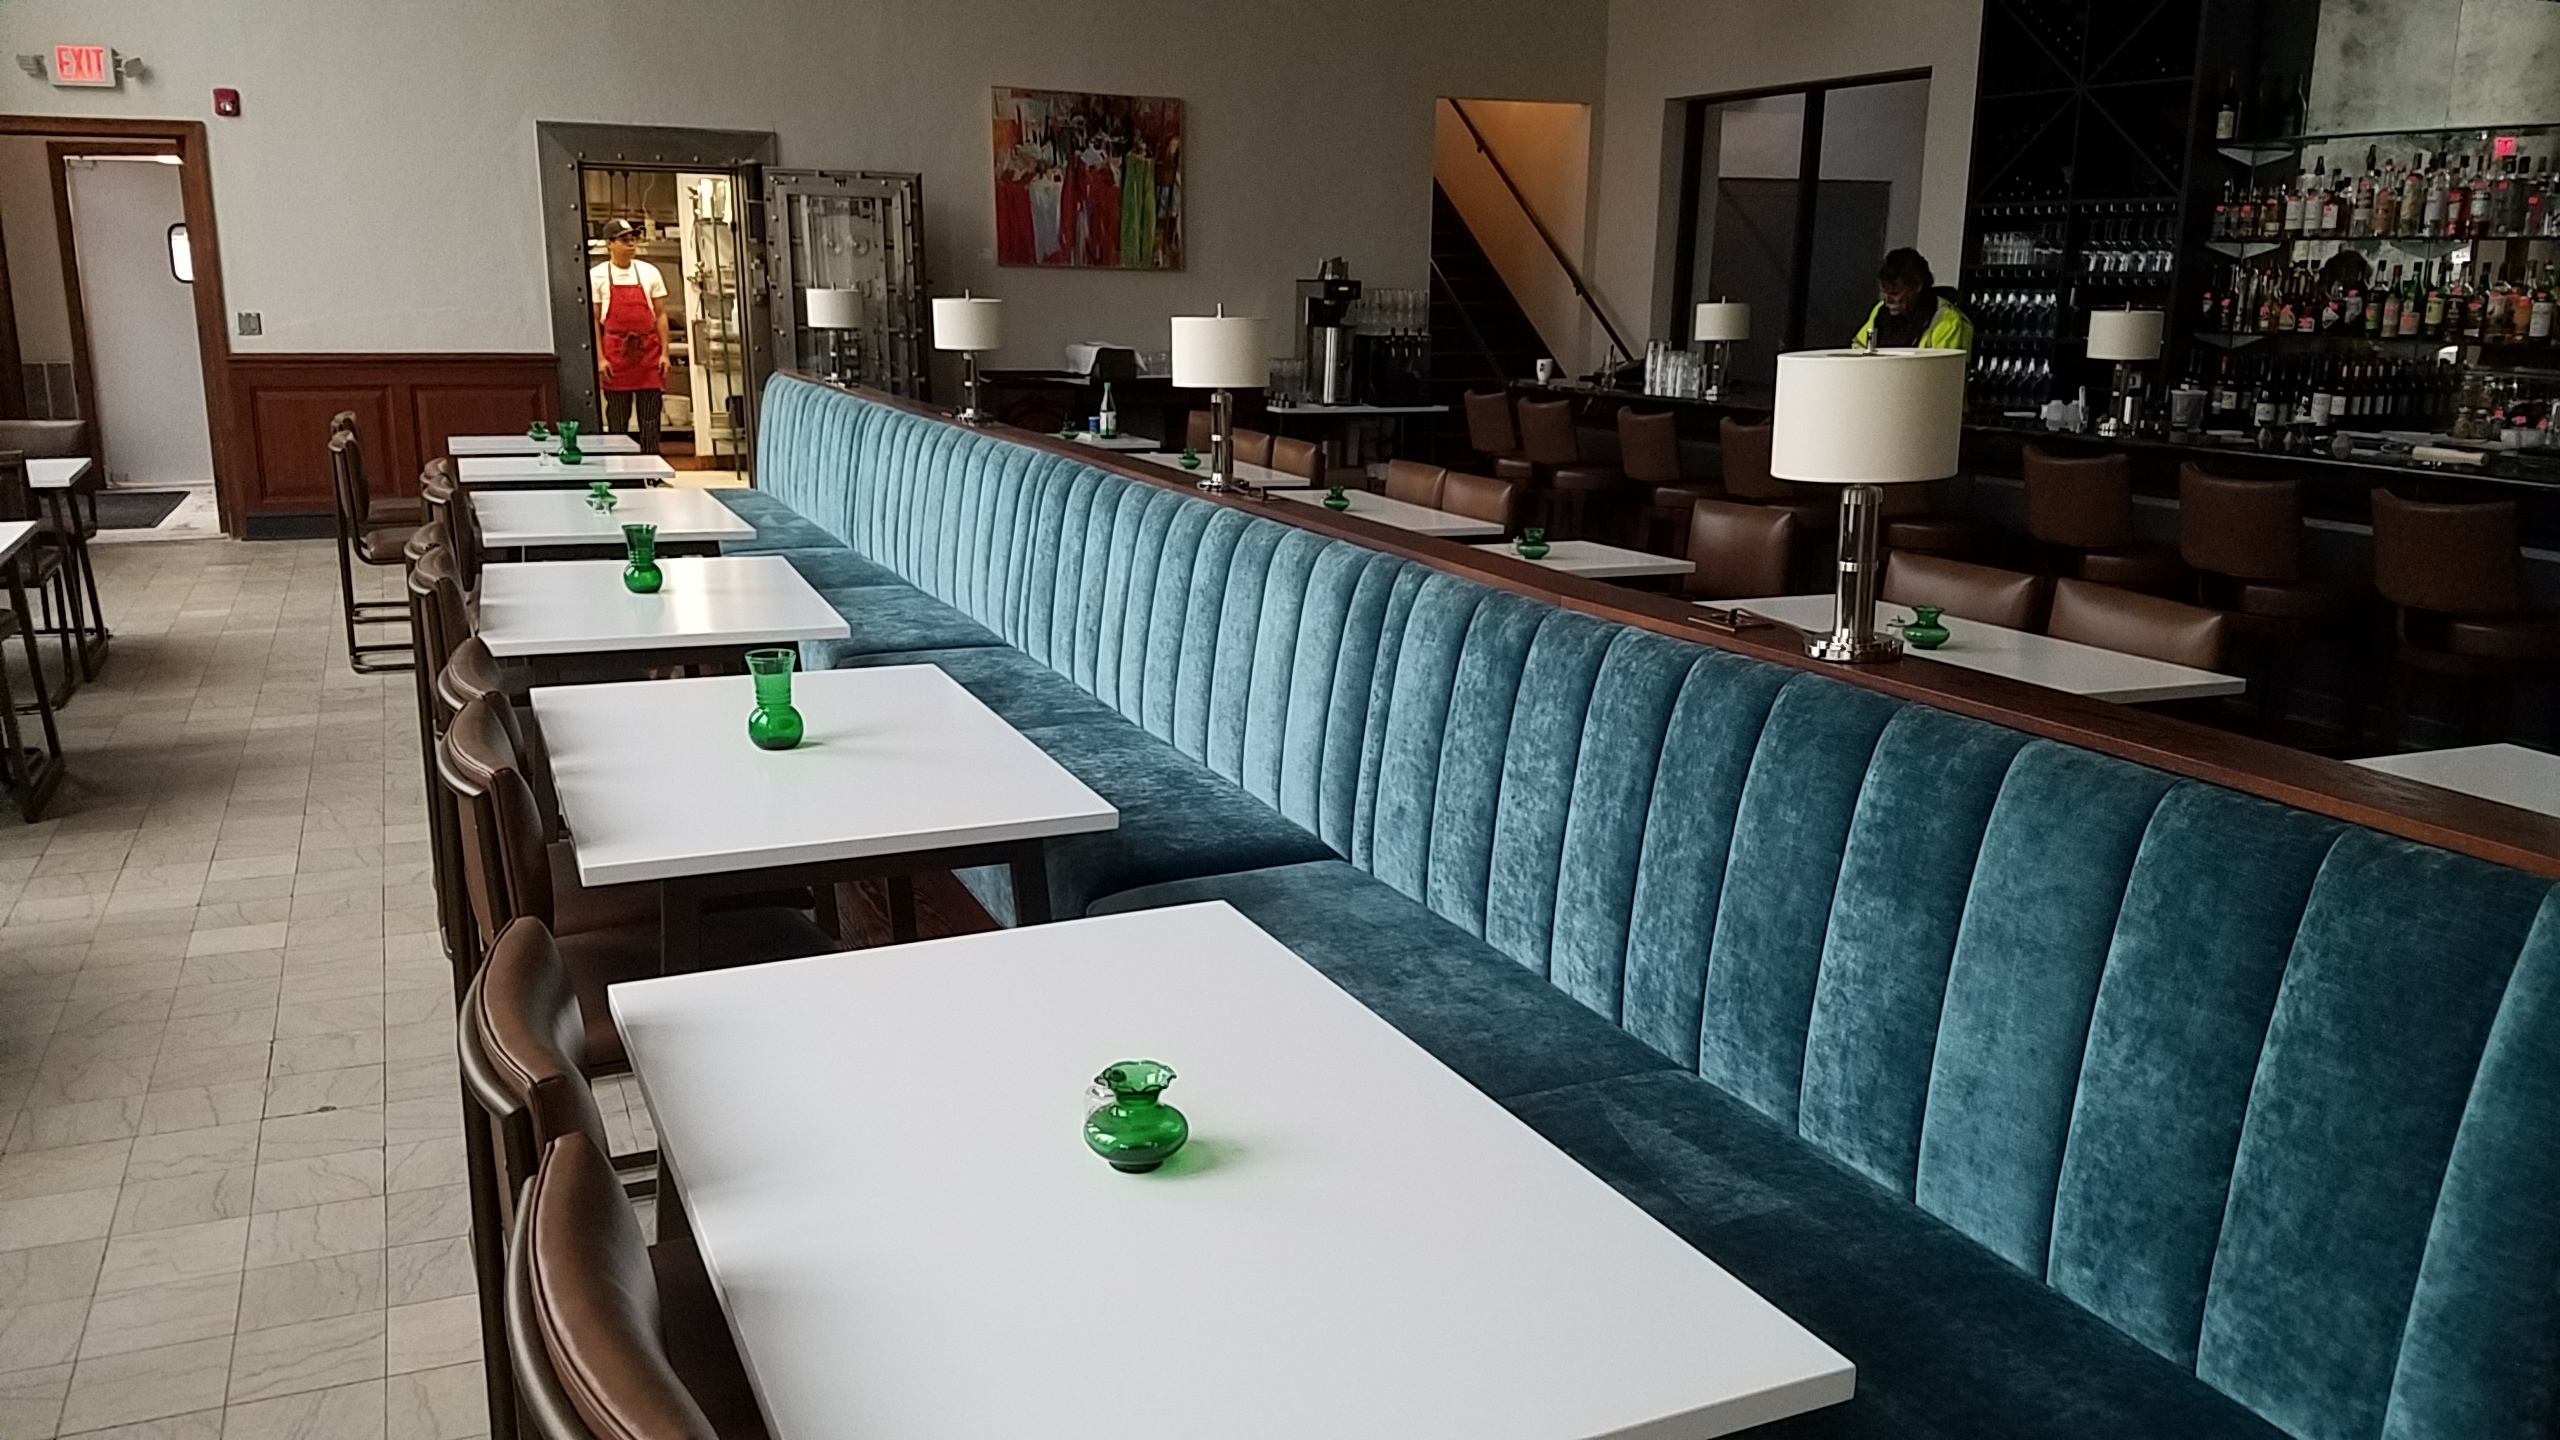 The hackney bar and dining area seats and tables